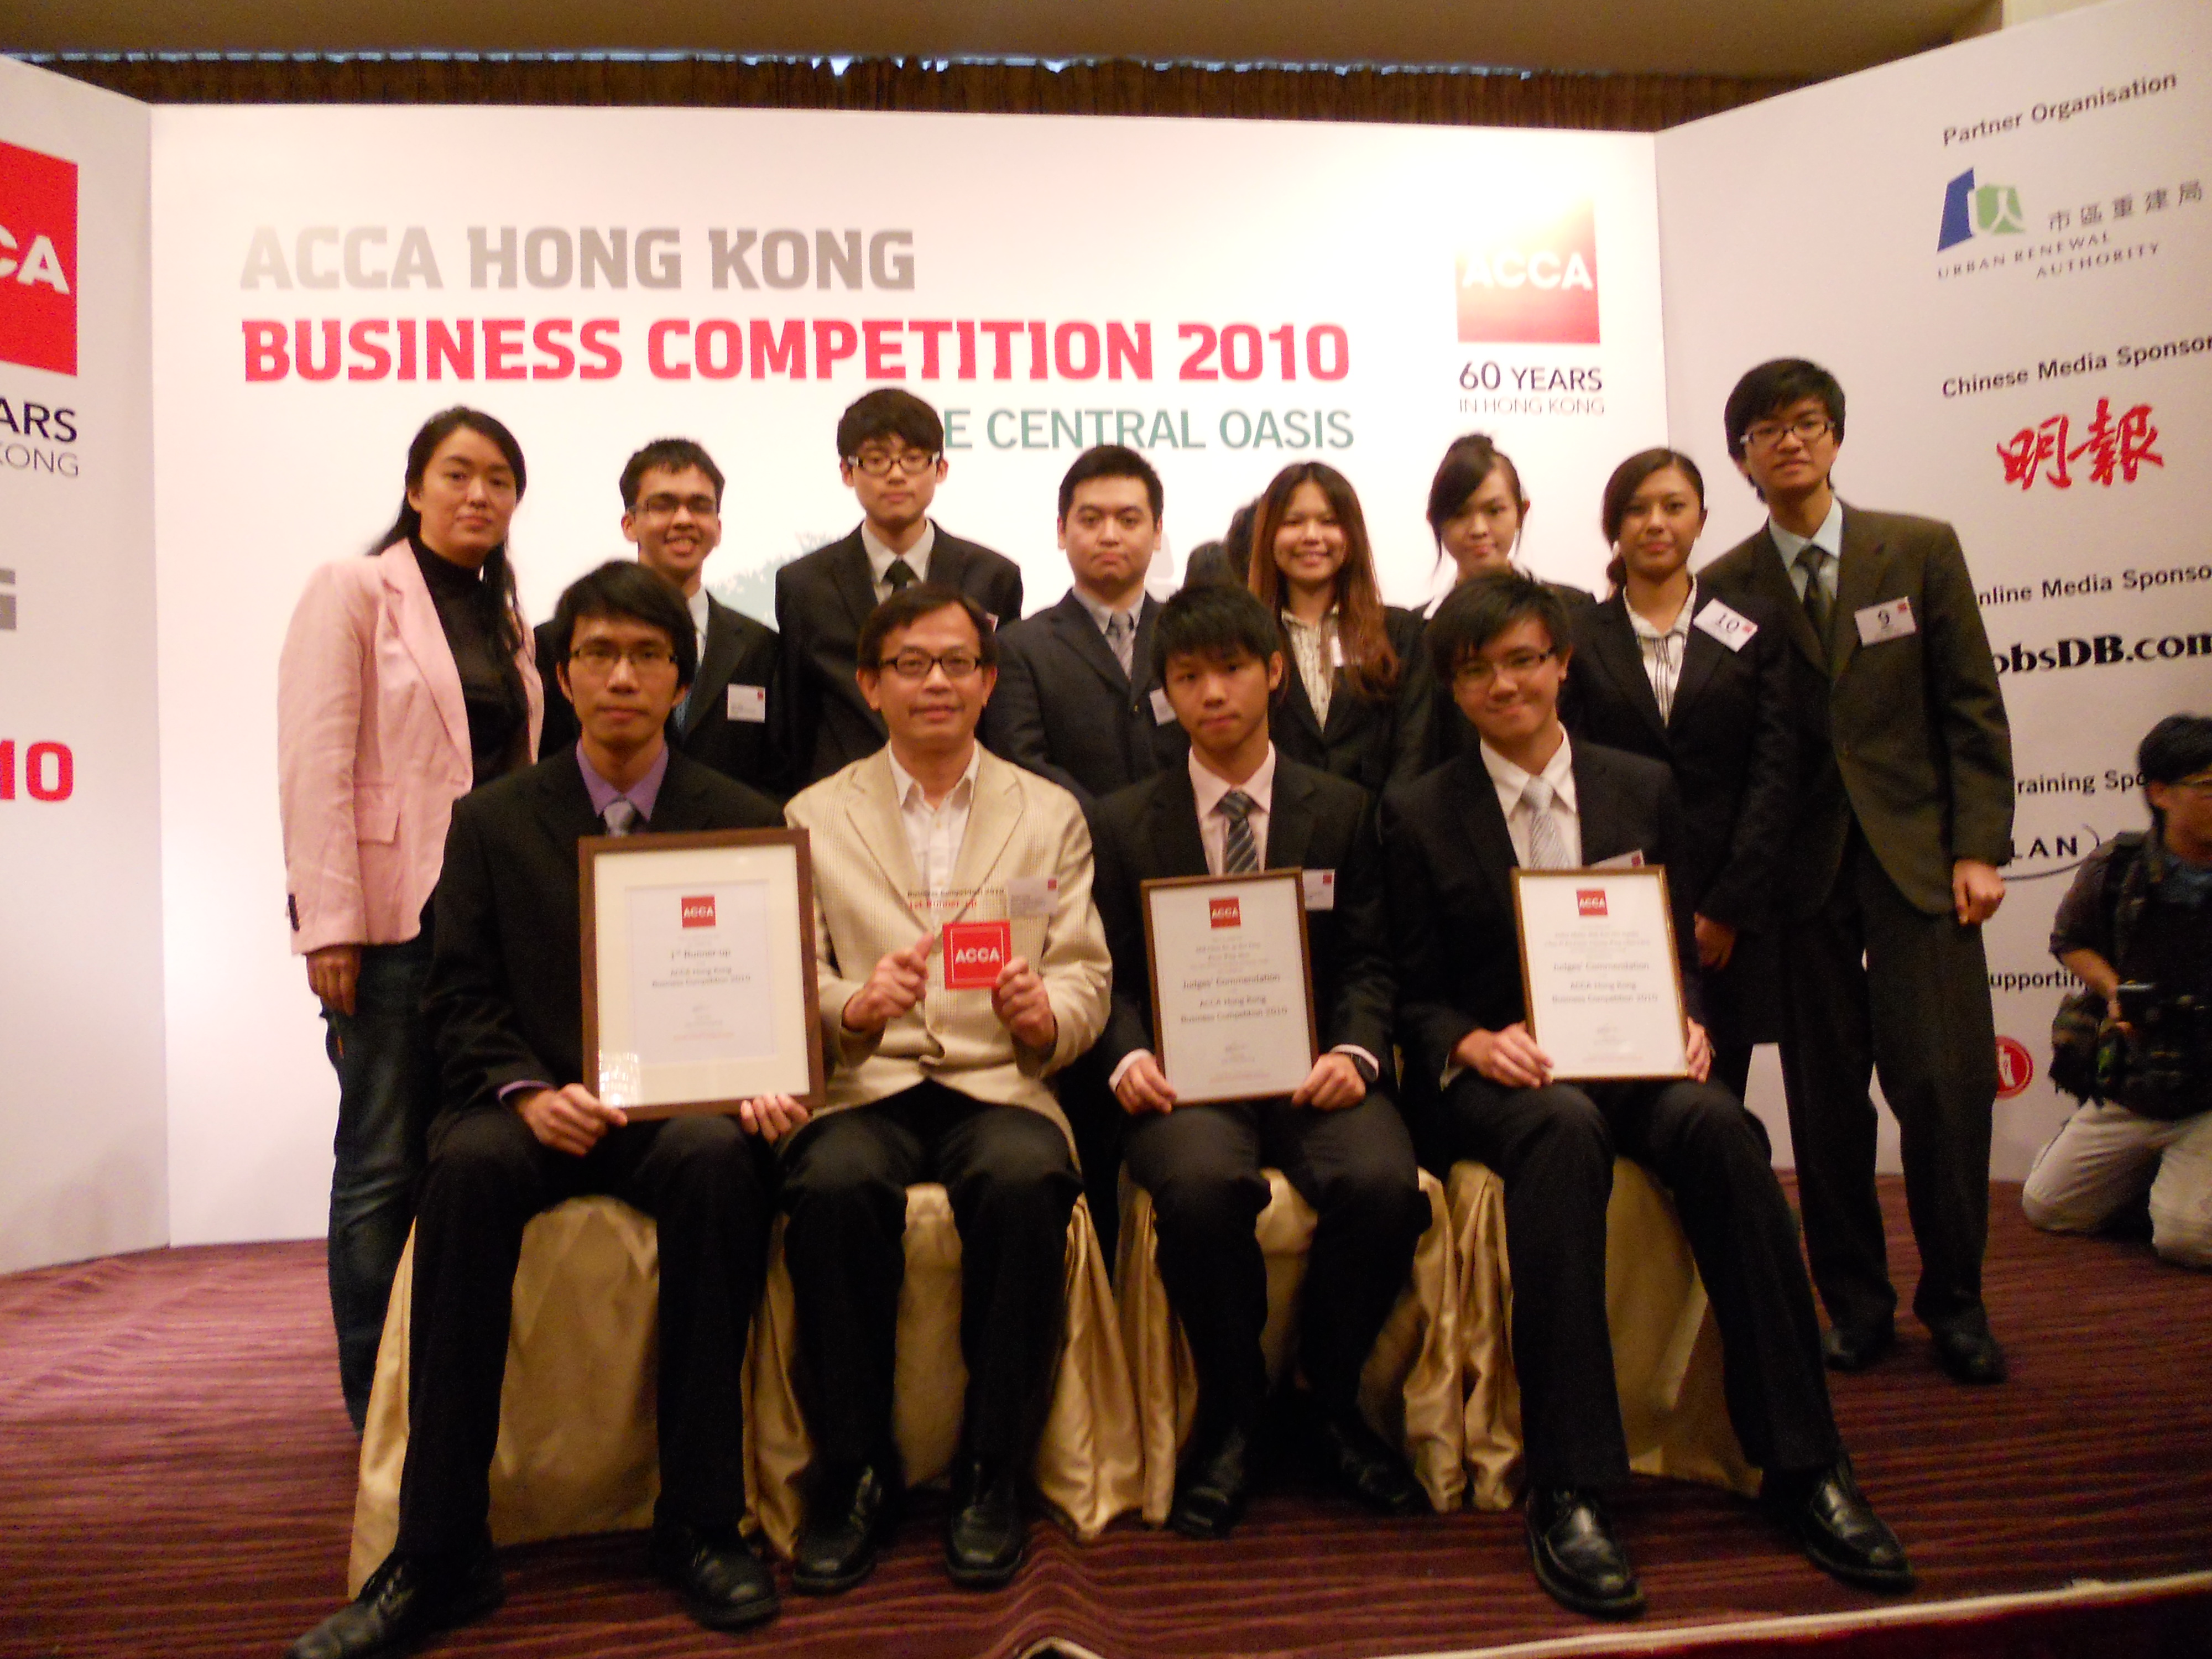 ACCA Hong Kong Business Competition 2010 - Photo - 5